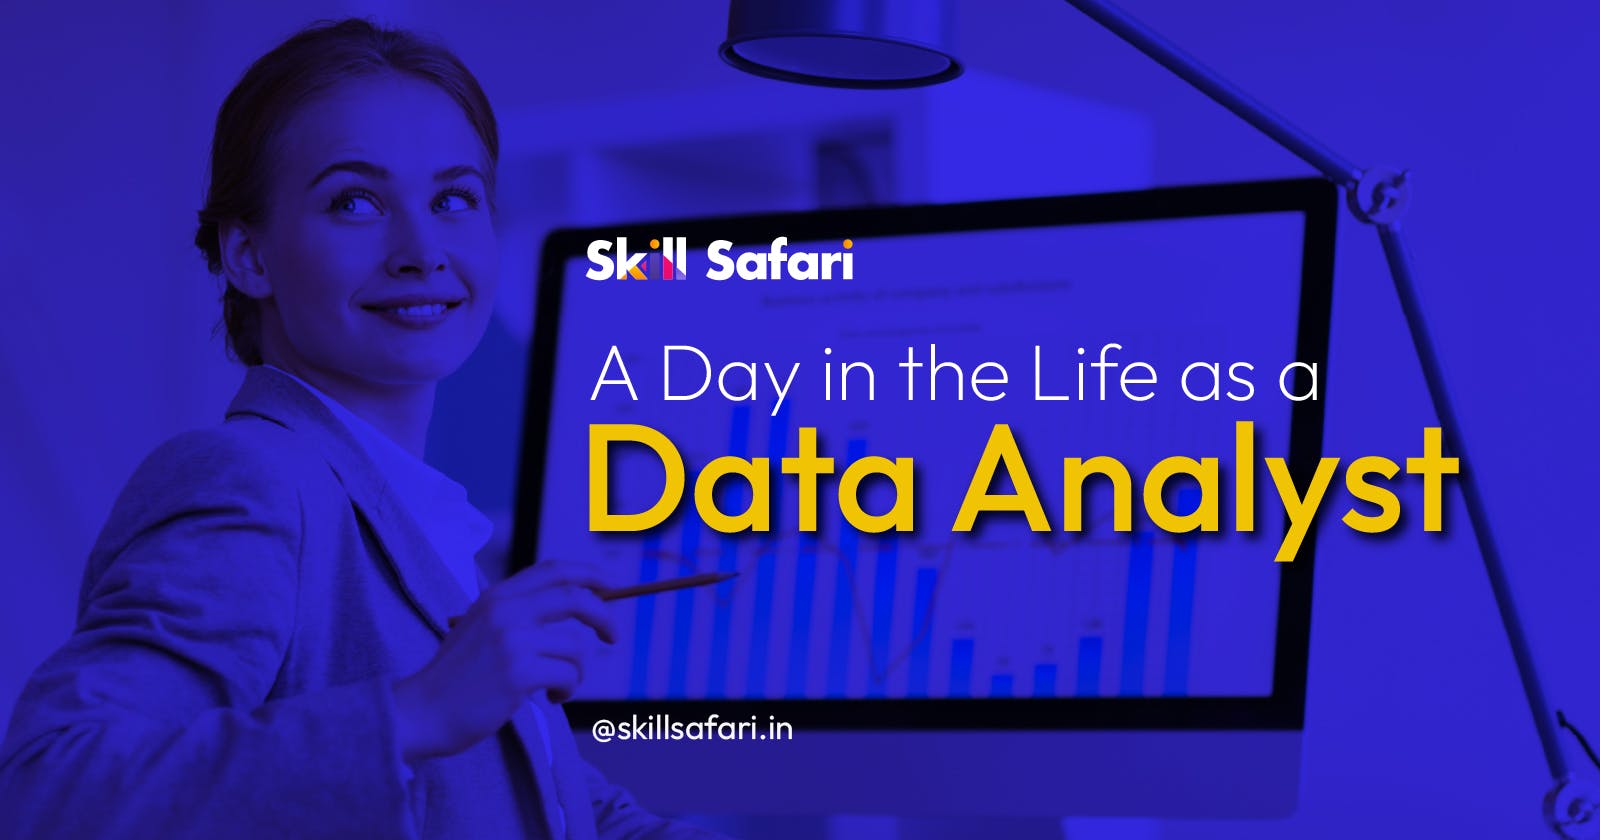 A Day in the Life as a Data Analyst